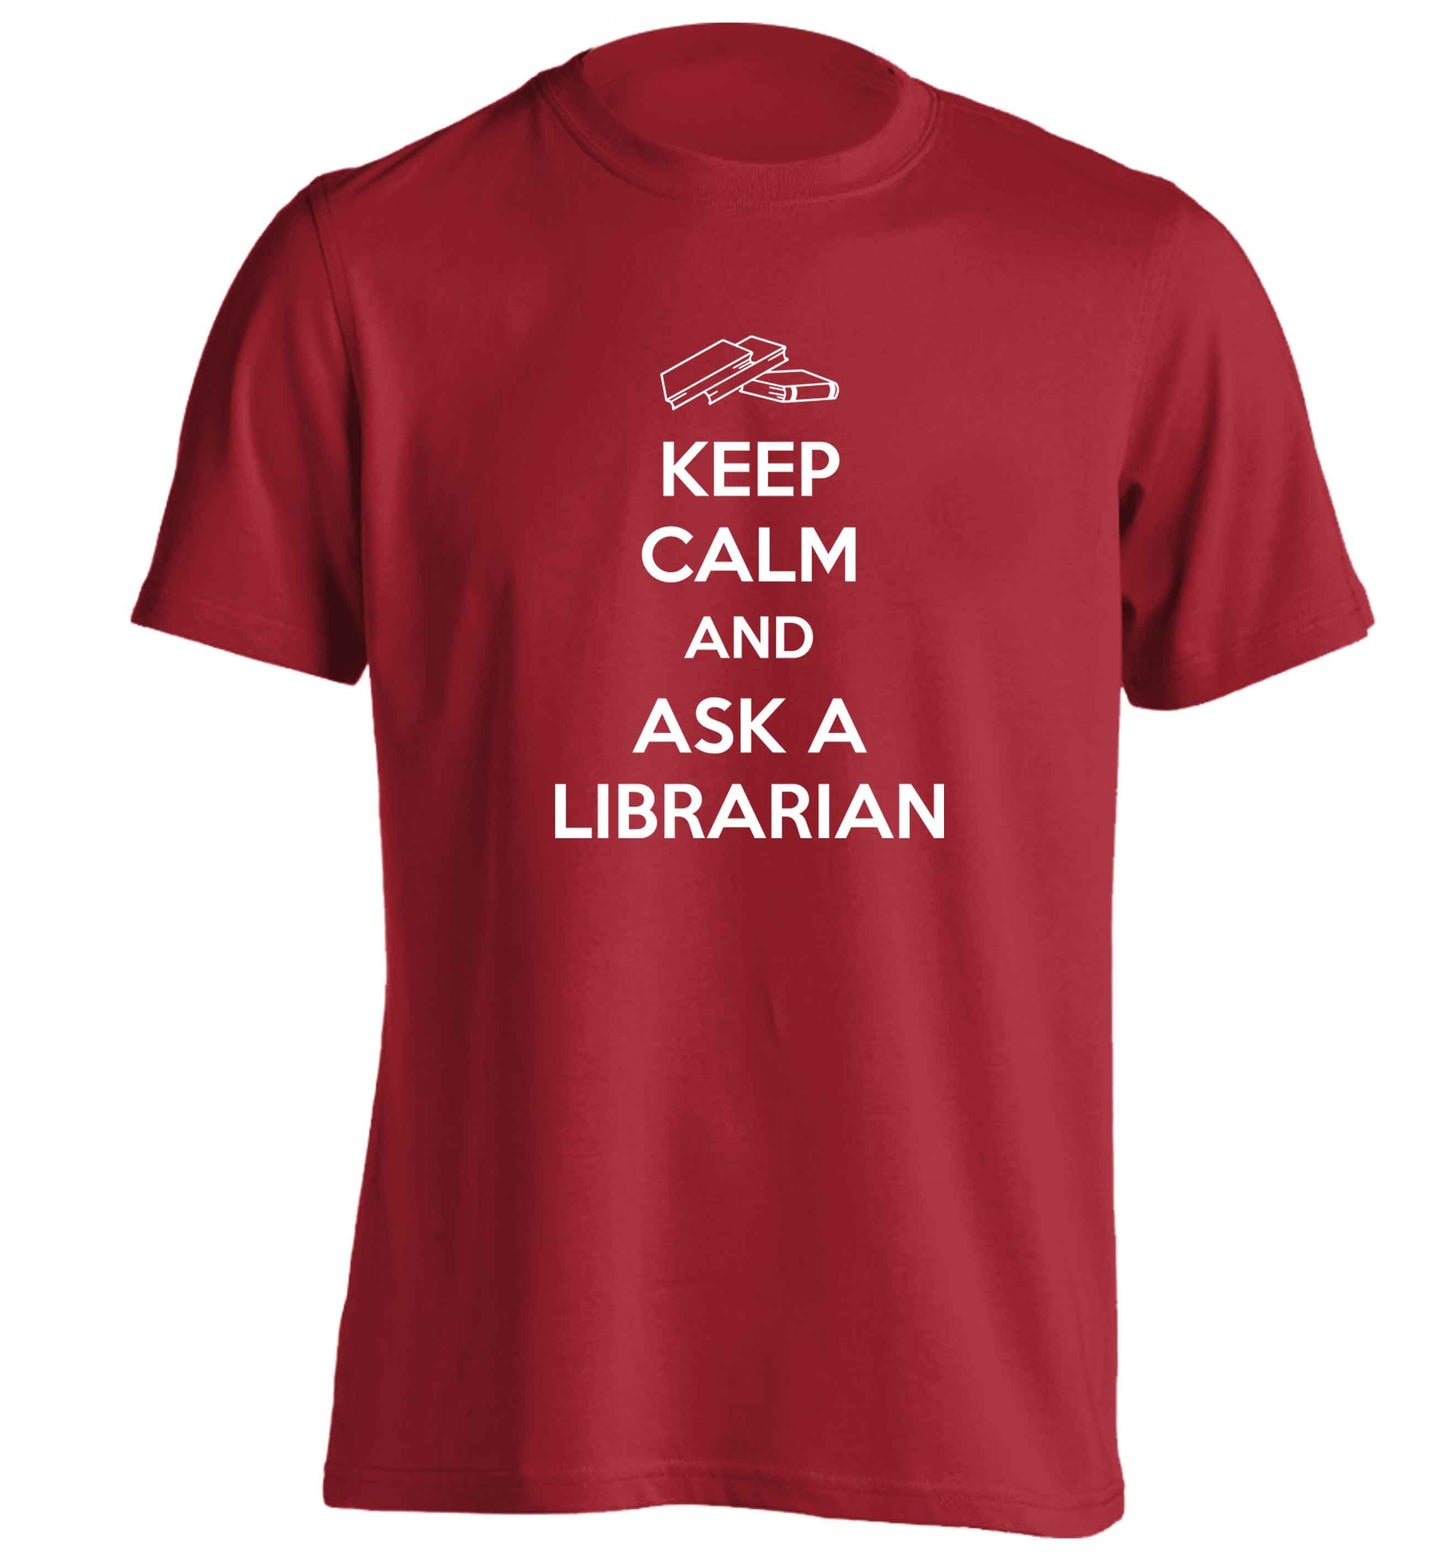 Keep calm and ask a librarian adults unisex red Tshirt 2XL